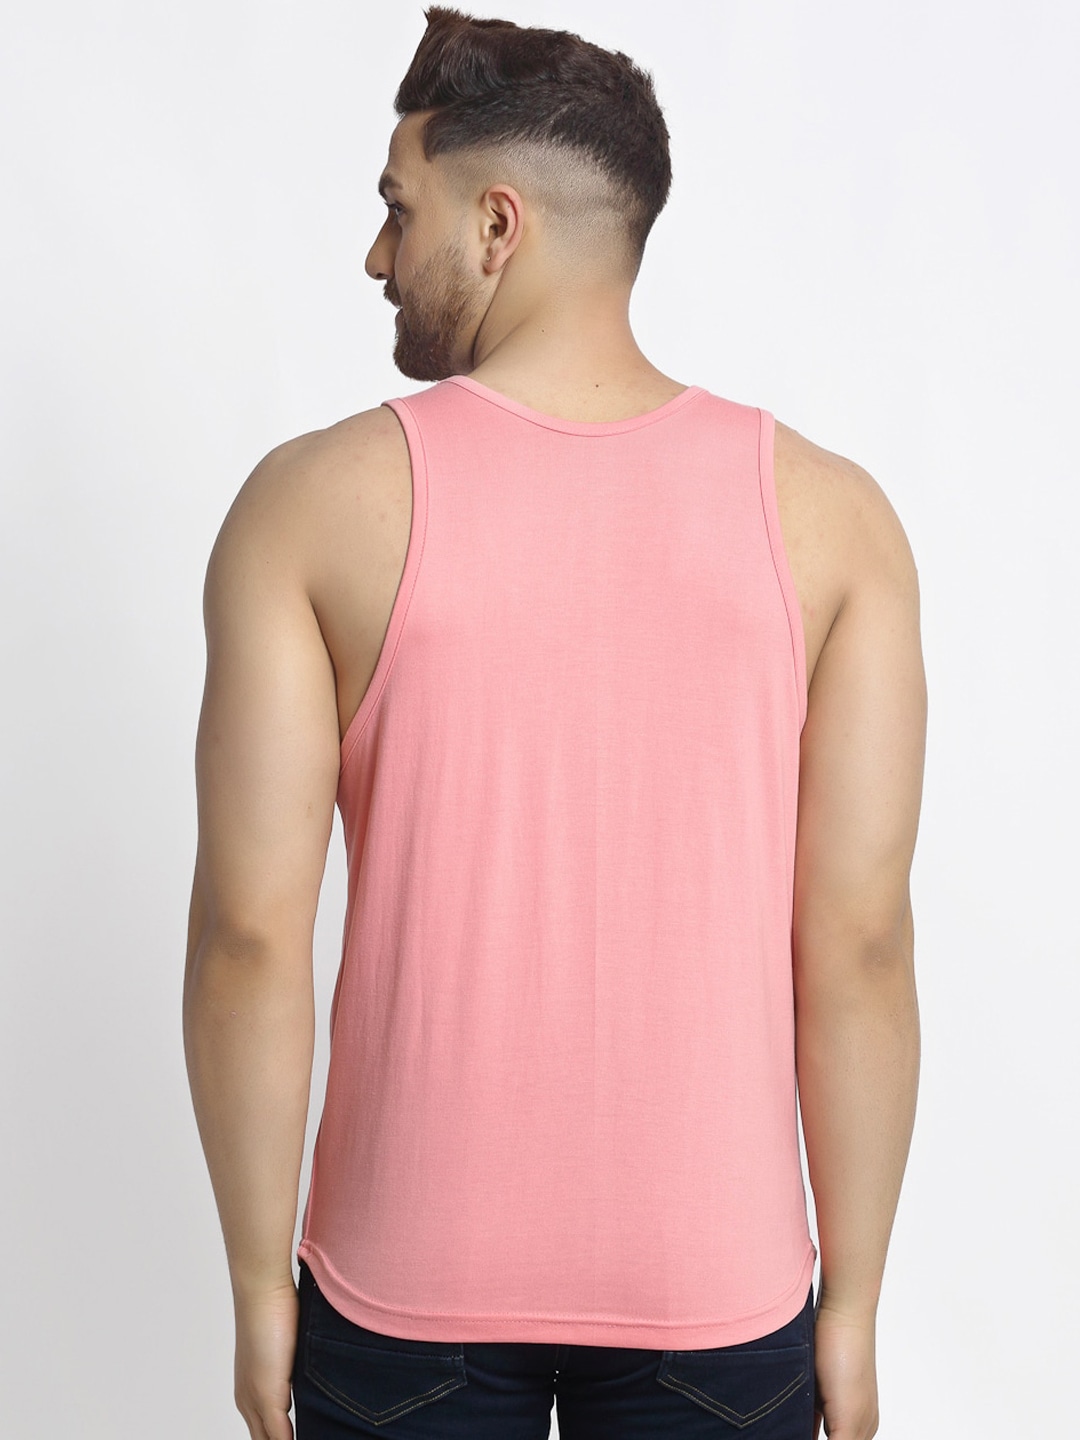 Clothing Innerwear Vests | Friskers Men Coral Solid Pure Cotton Innerwear Vest - ZH68018